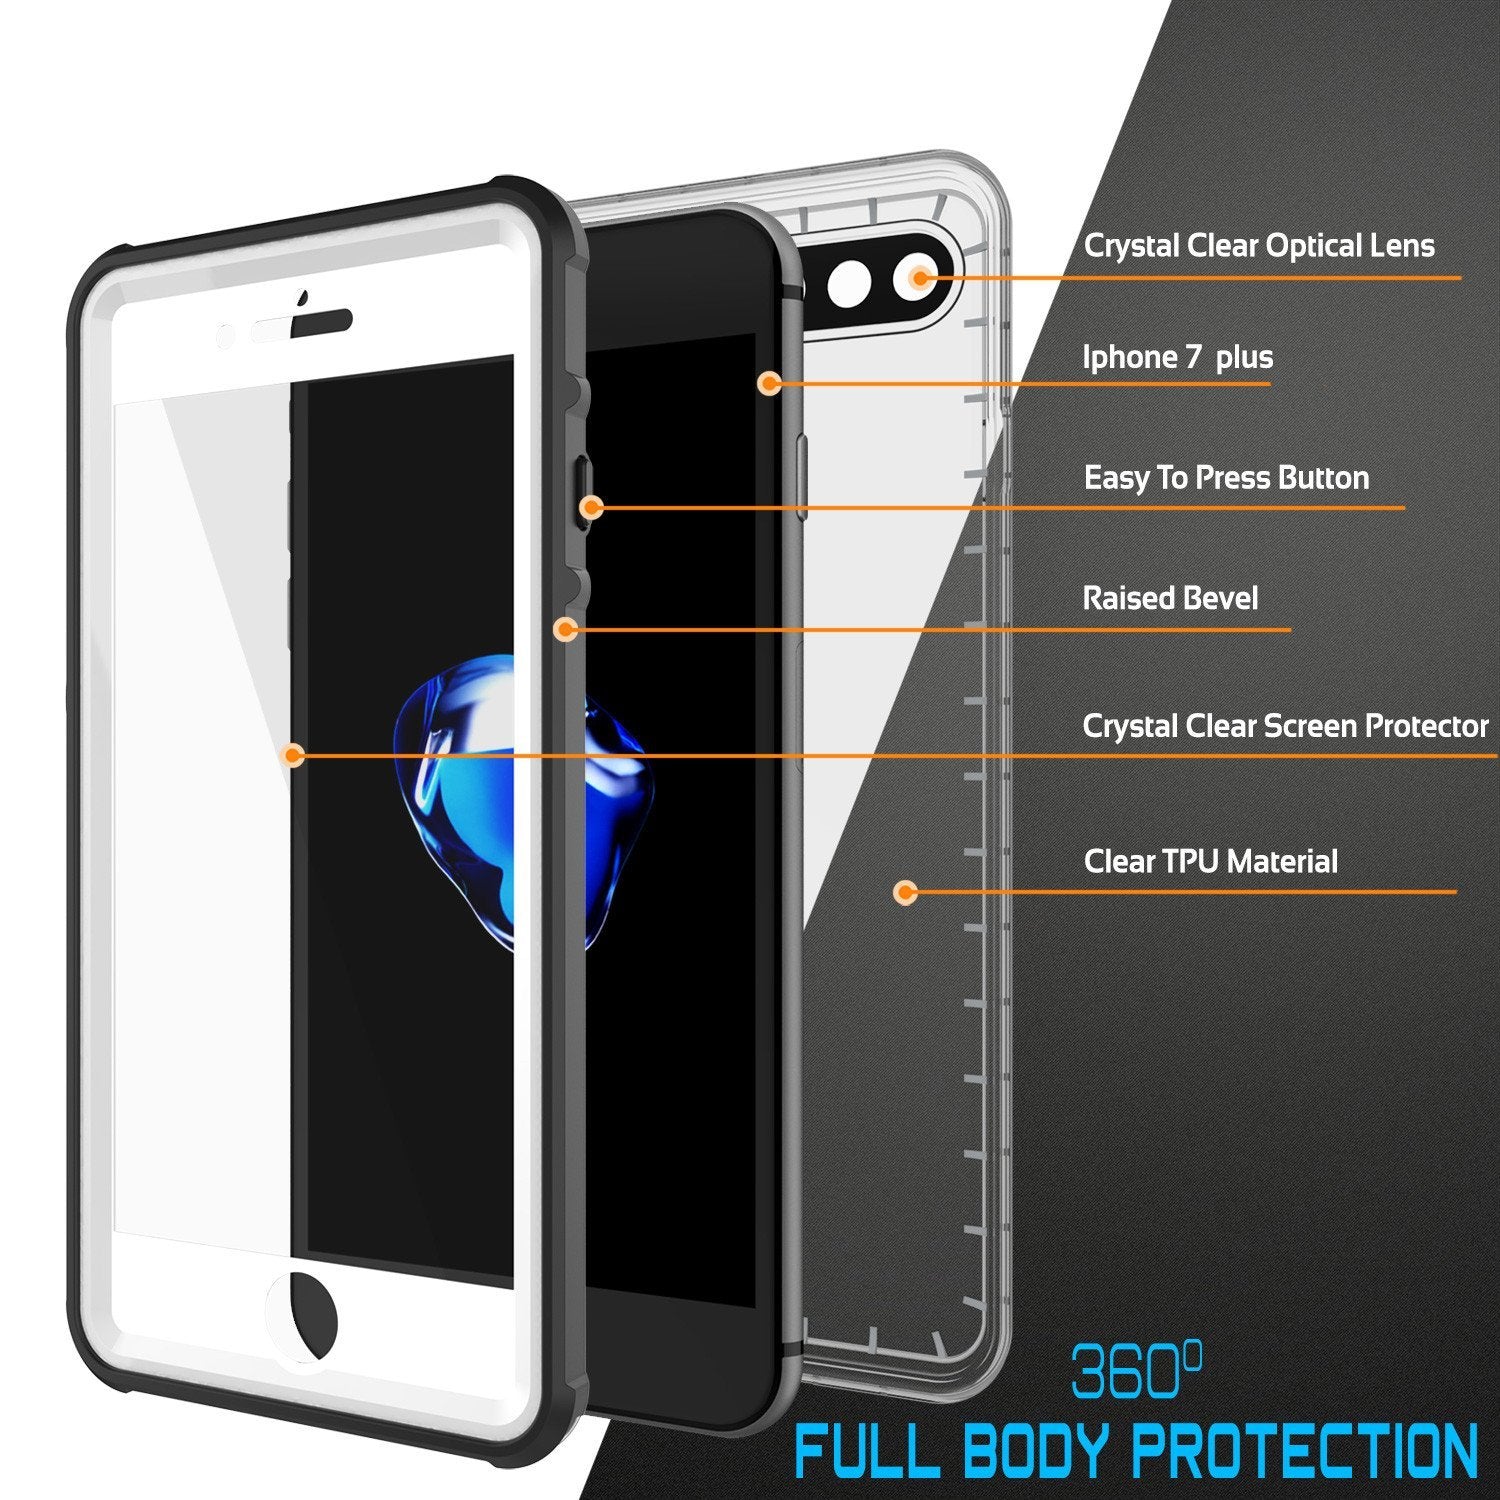 iPhone 8+ Plus Waterproof Case, PUNKcase CRYSTAL White W/ Attached Screen Protector  | Warranty